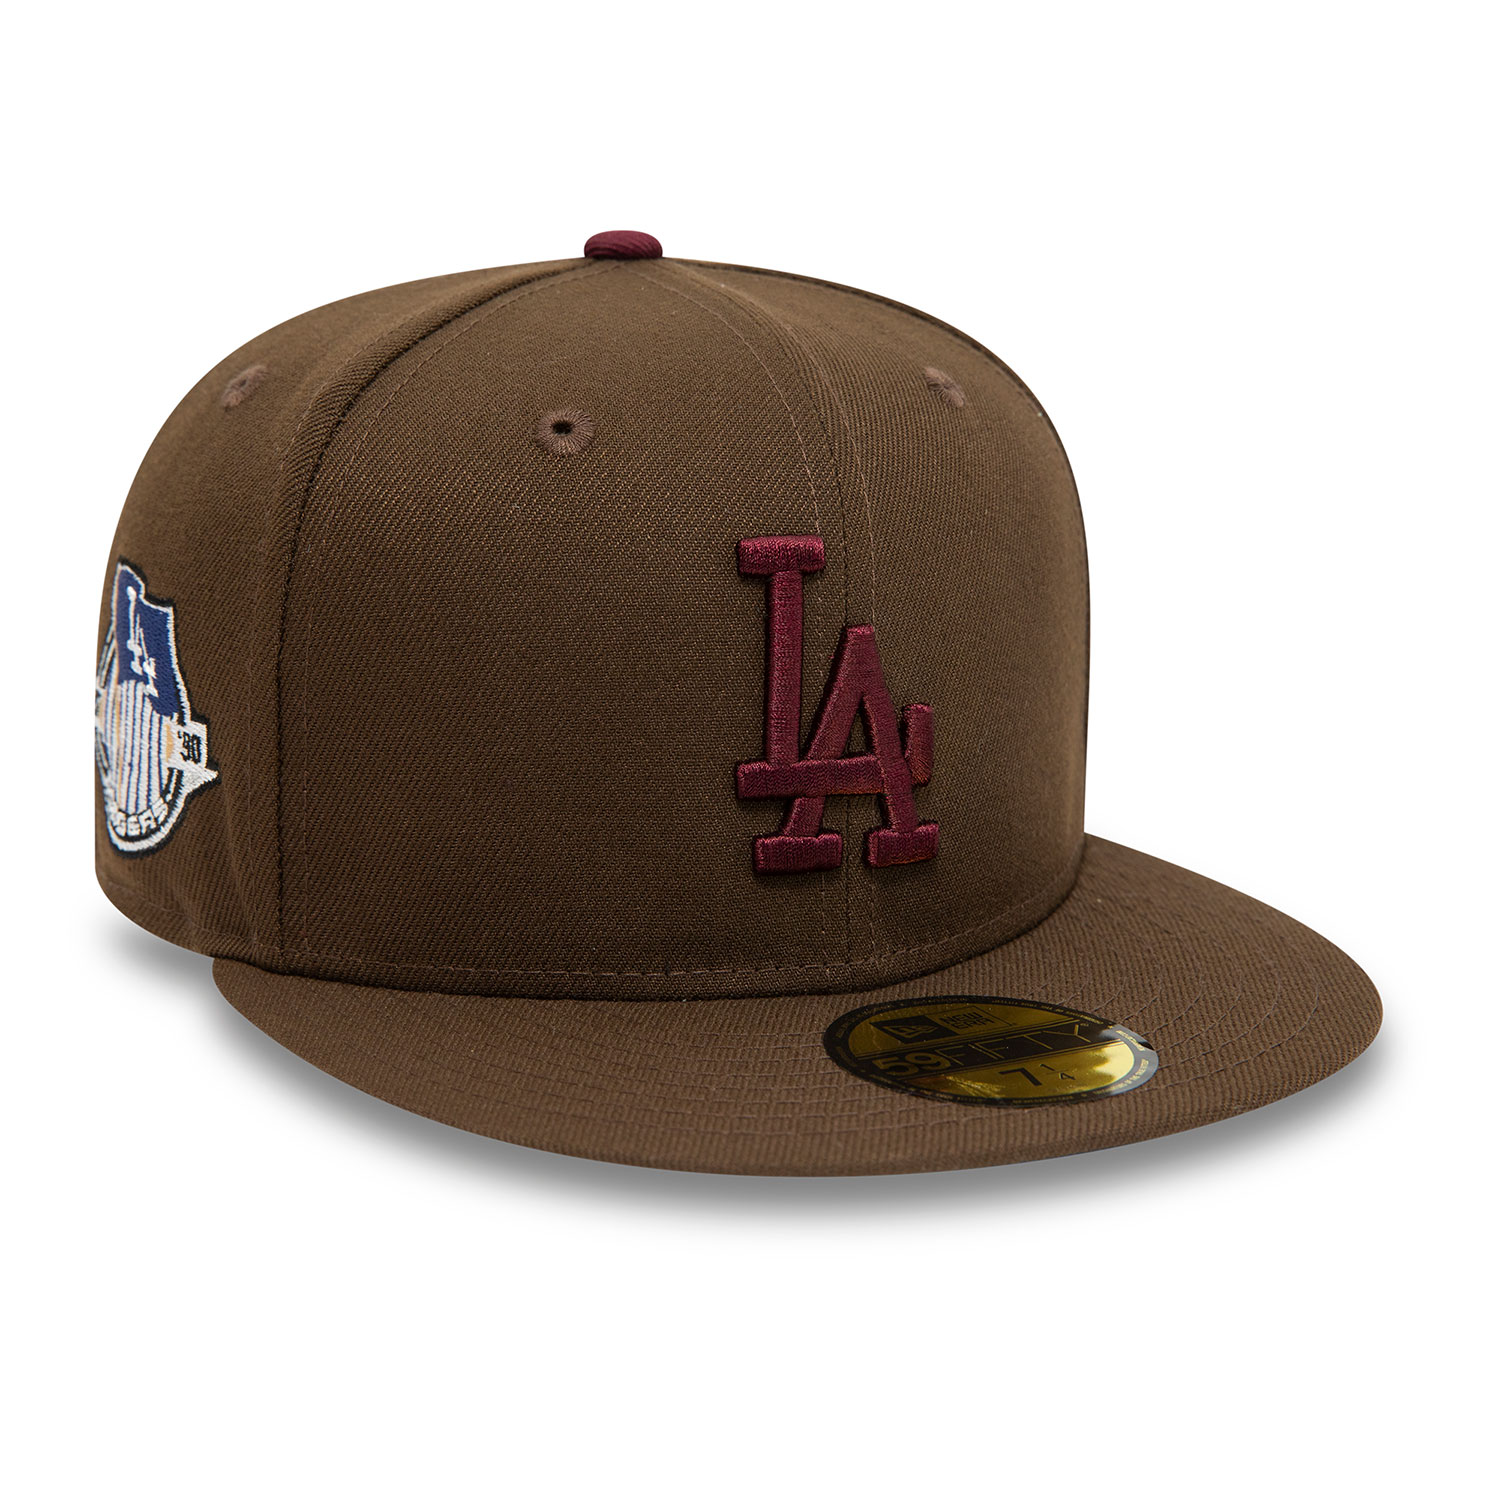 Official New Era MLB Fall LA Dodgers Dark Brown 59FIFTY Fitted Cap